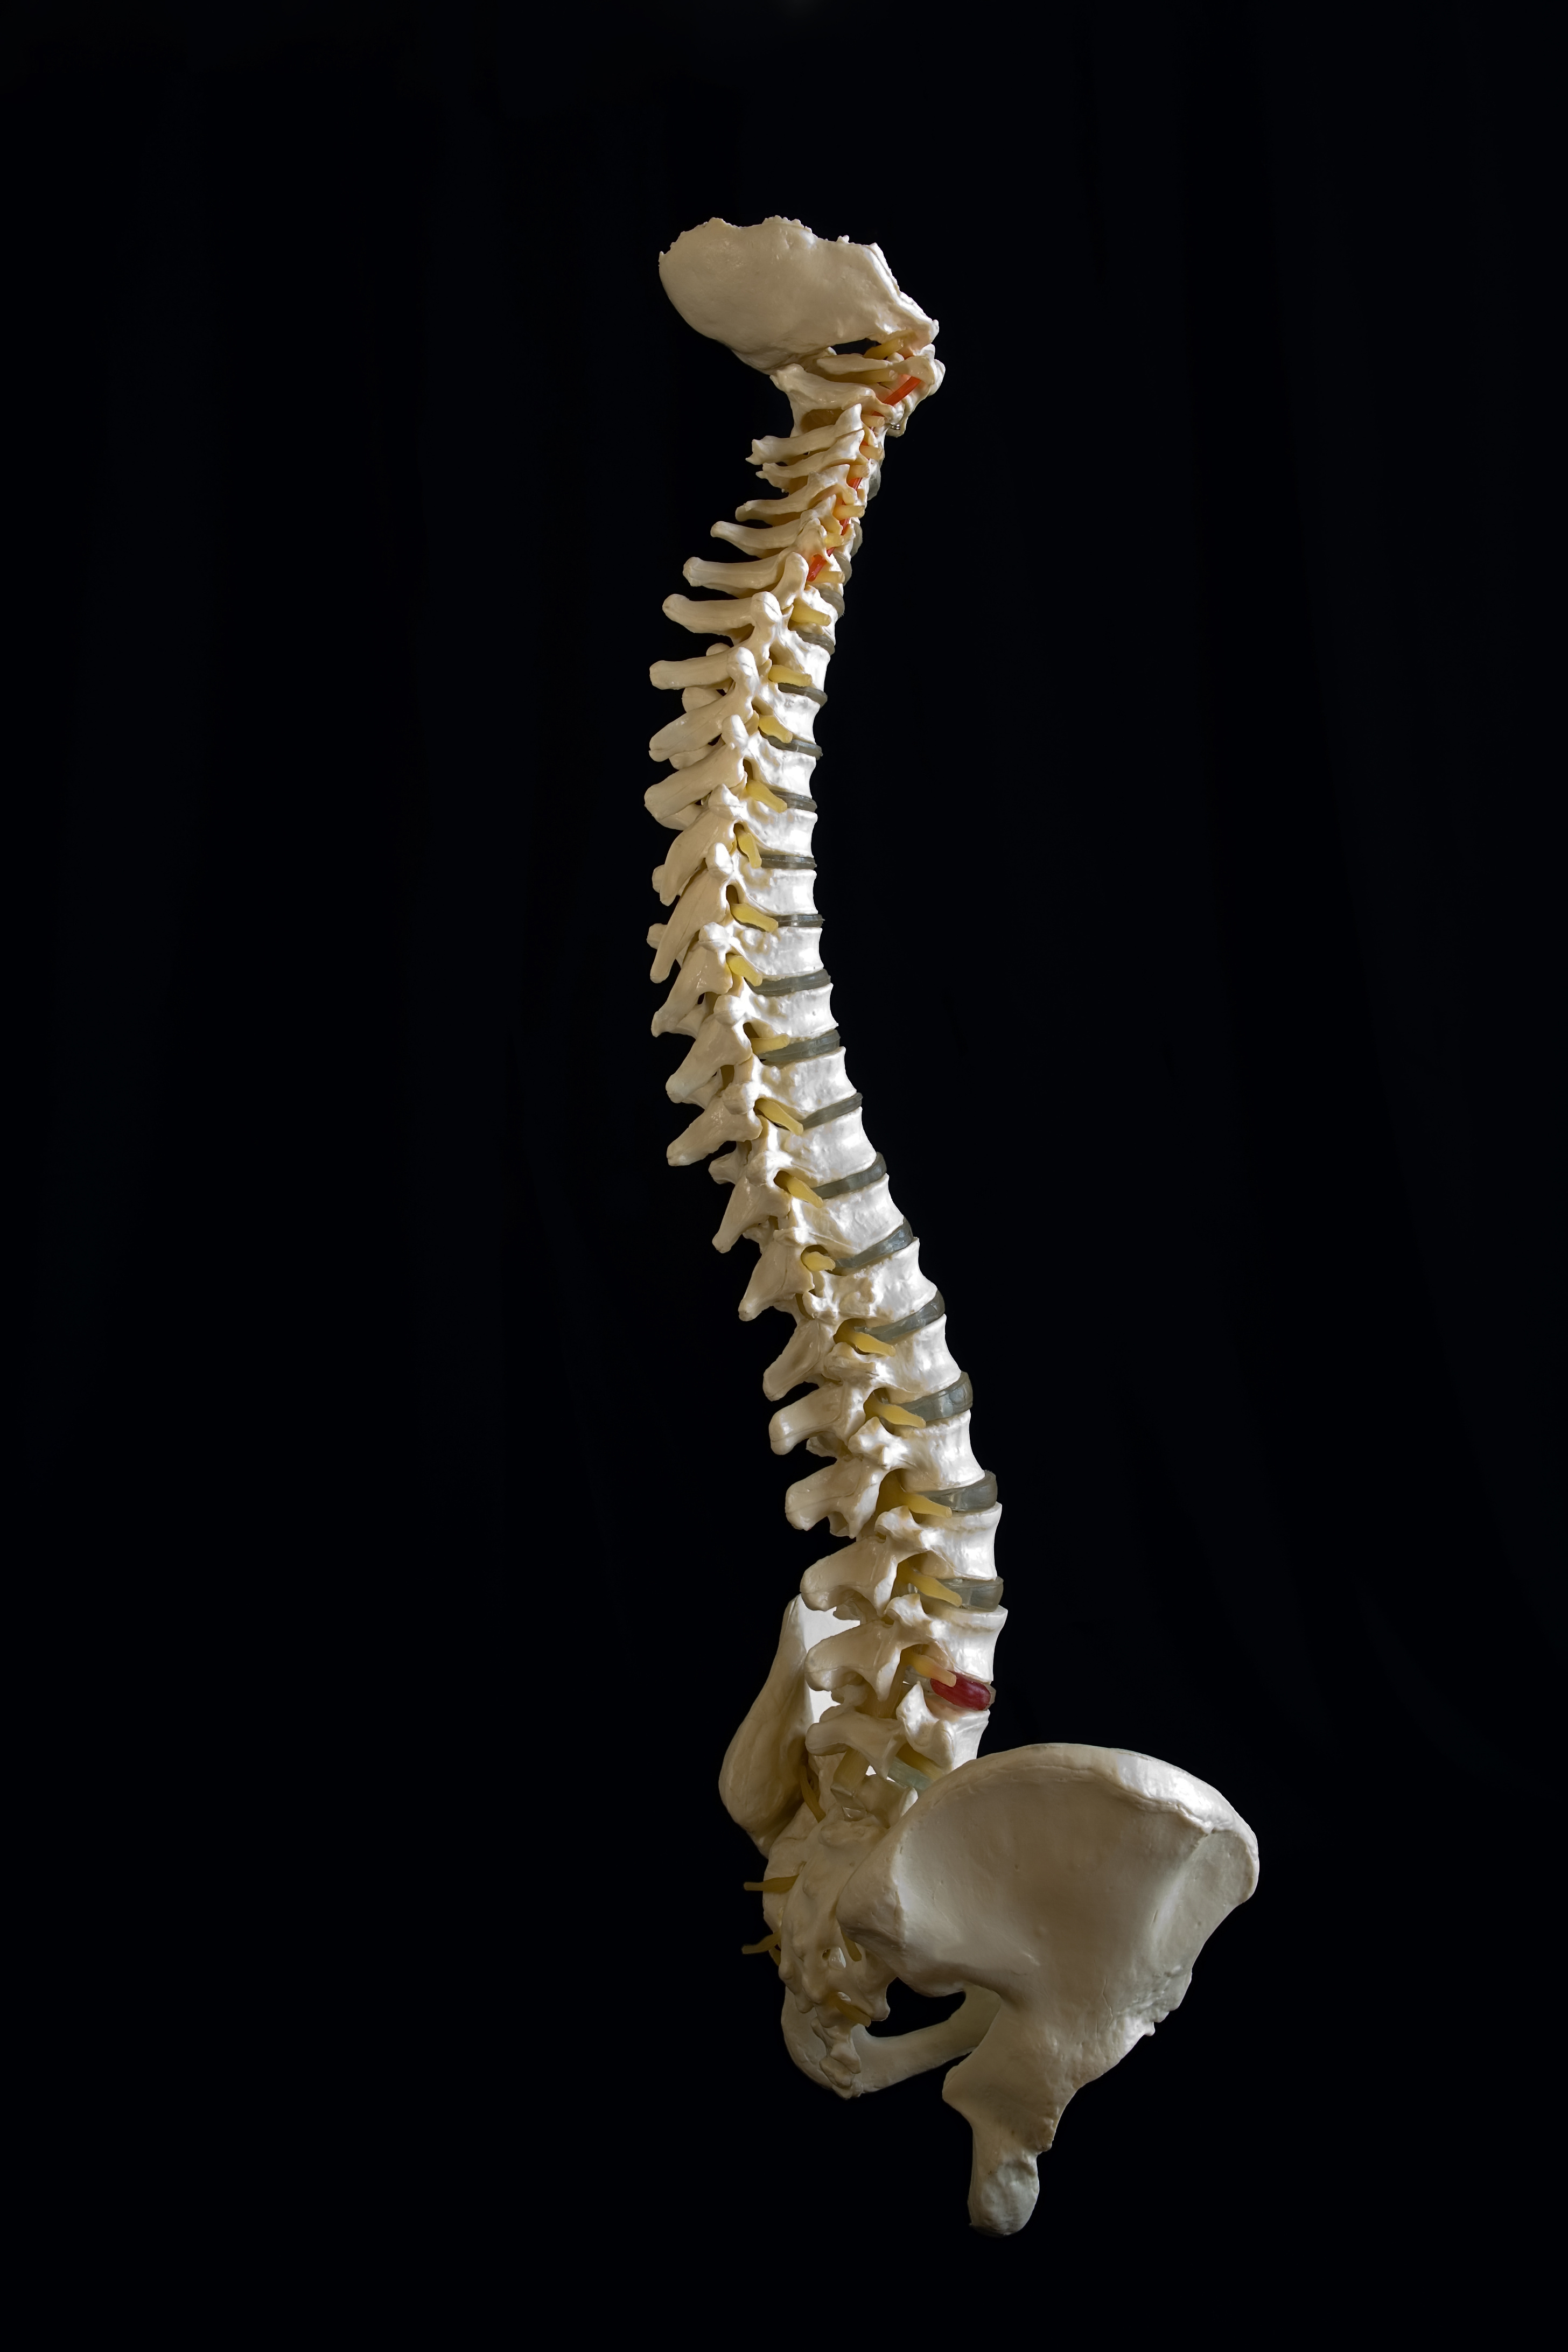 Spinal Cord Picture